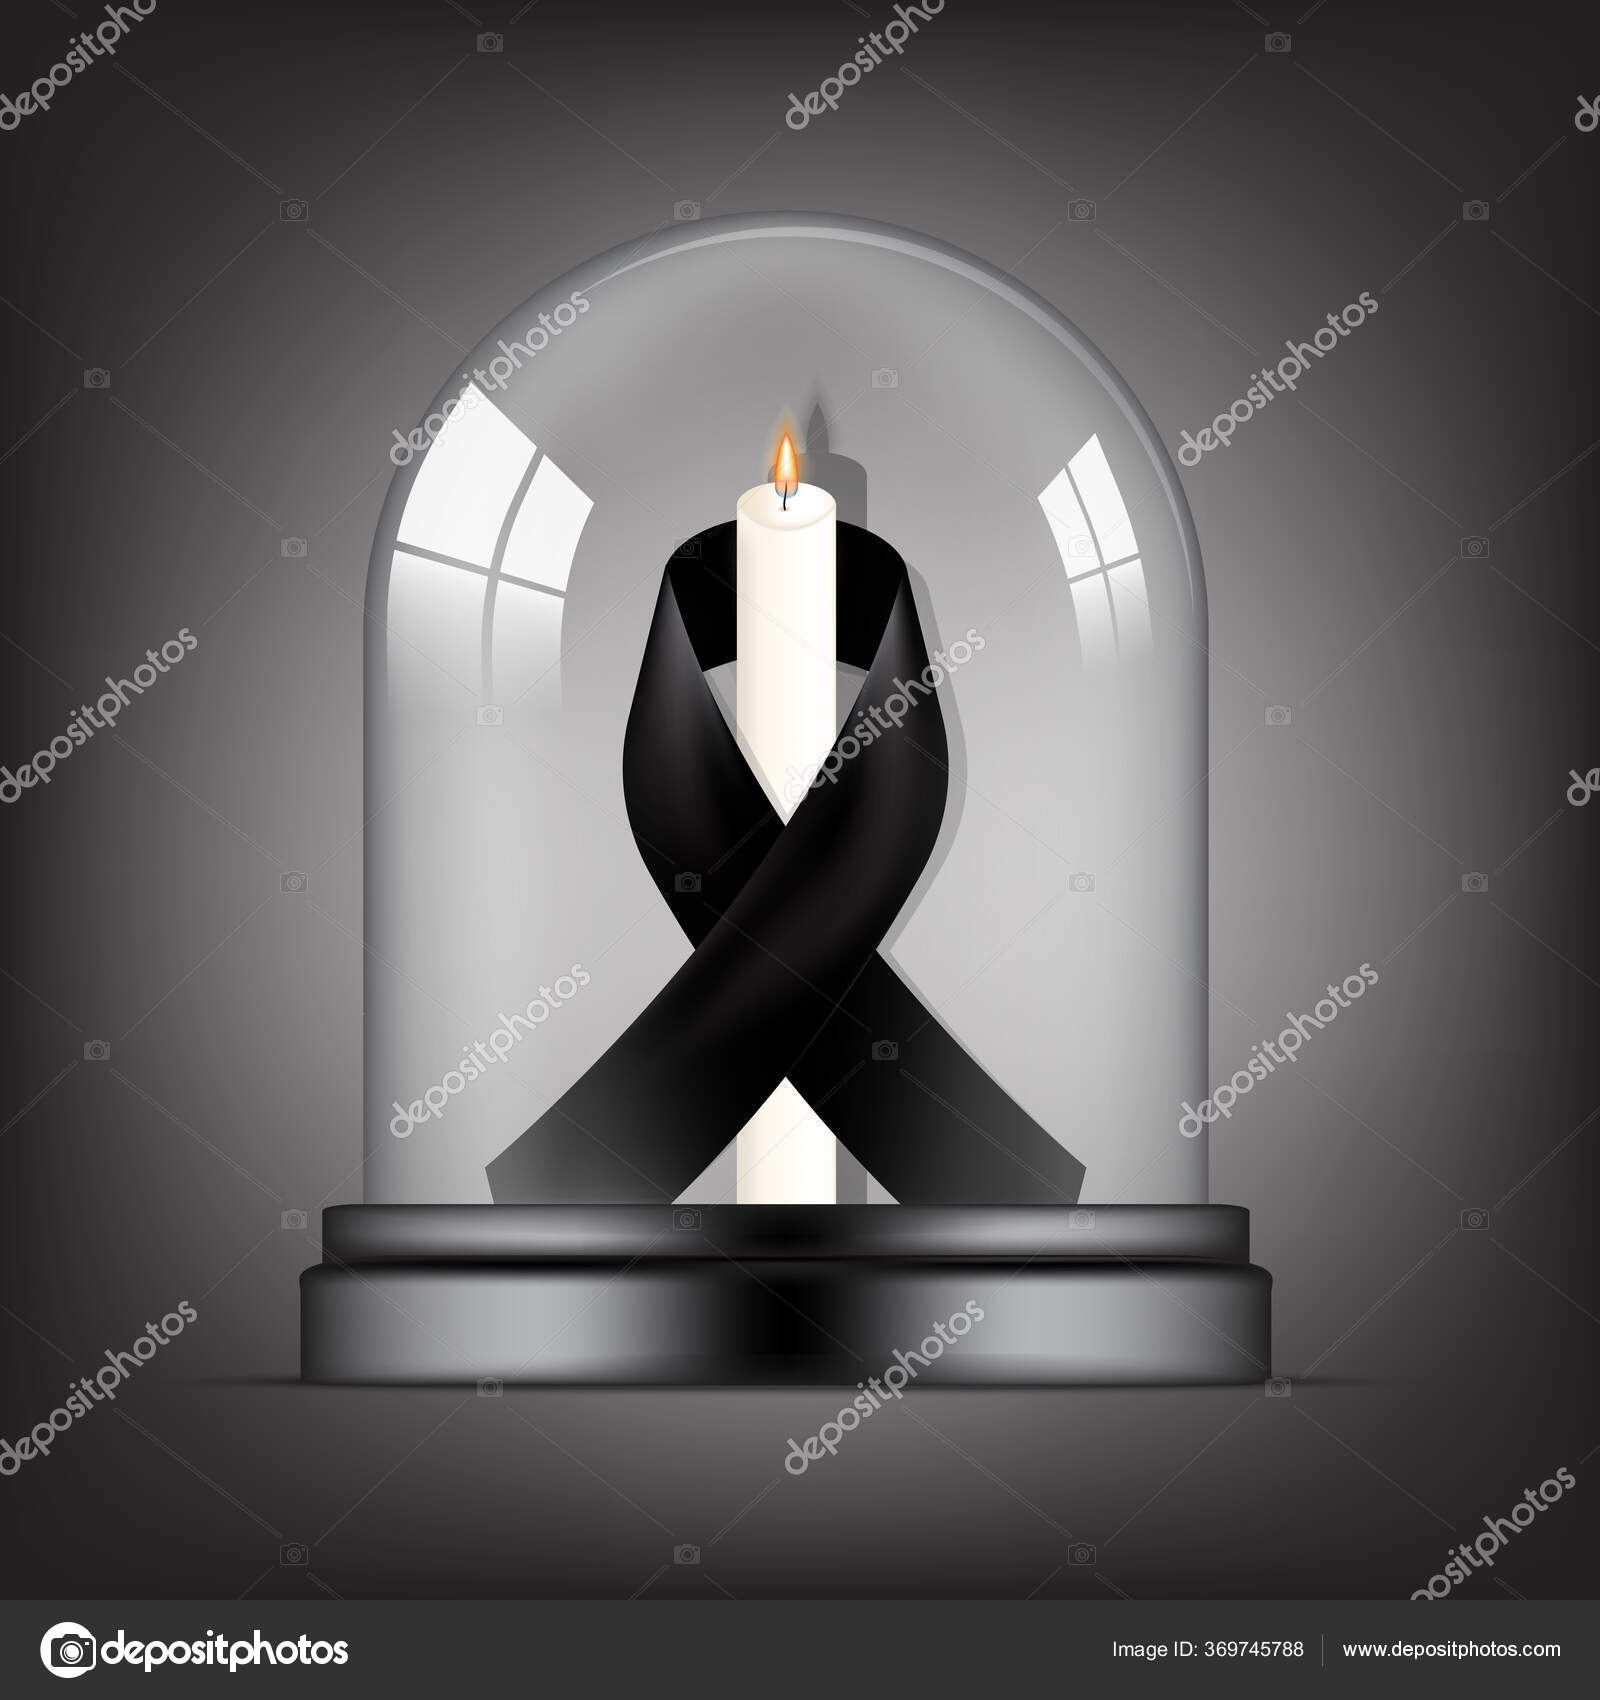 Rest In Peace Symbol Images - Free Download on Freepik